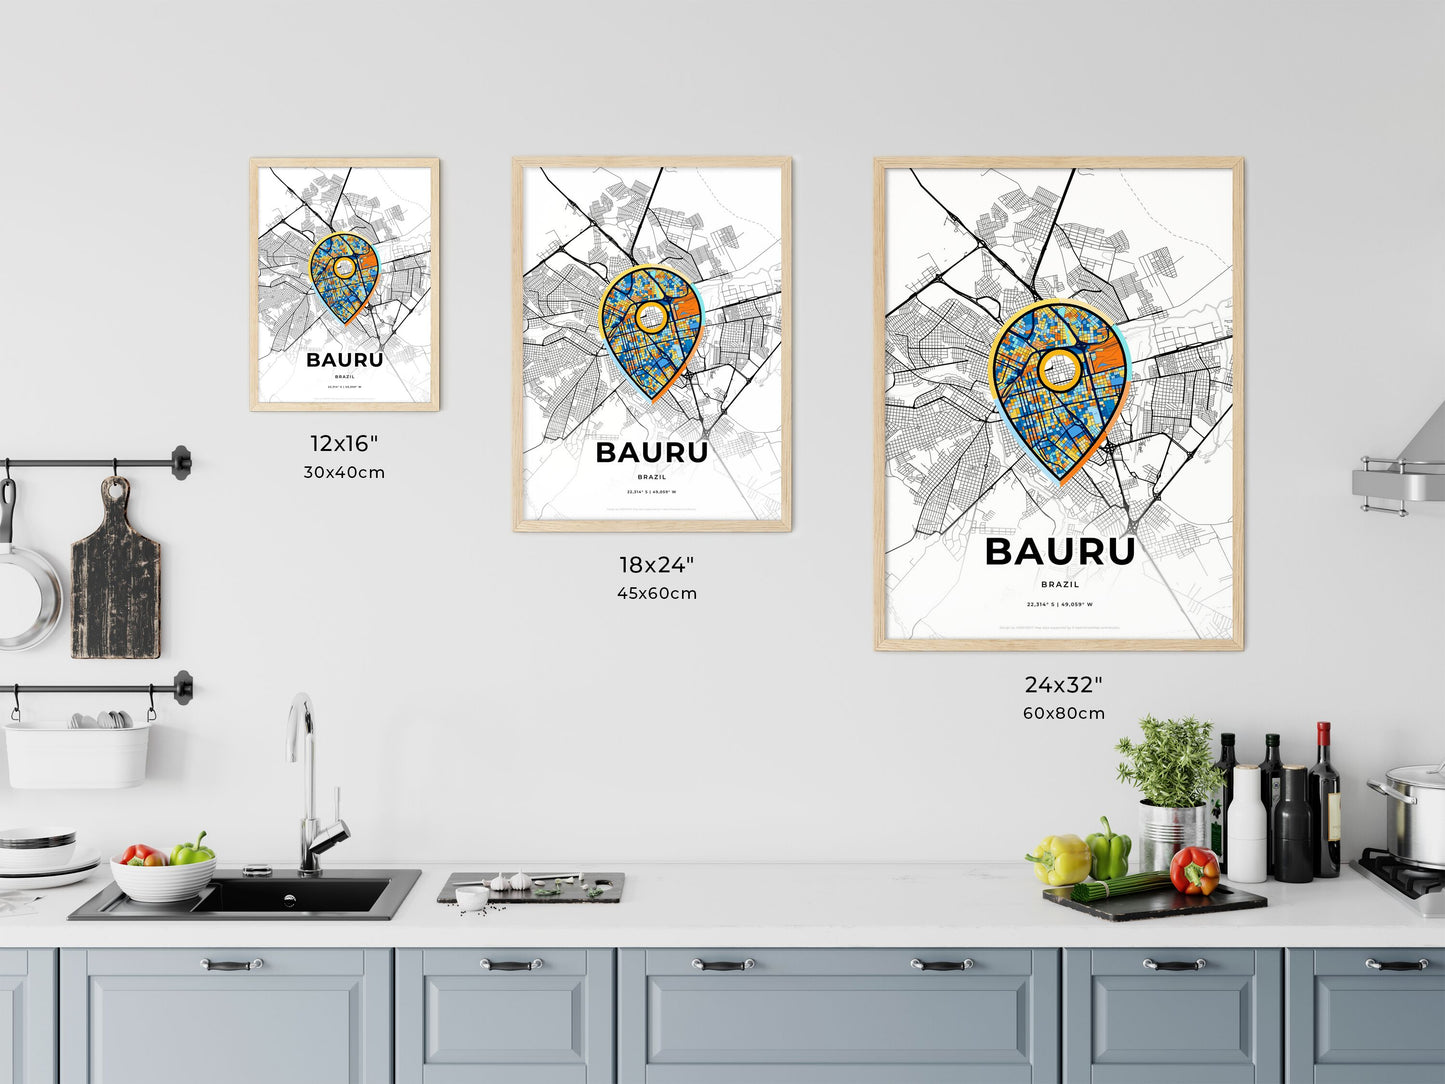 BAURU BRAZIL minimal art map with a colorful icon. Where it all began, Couple map gift.